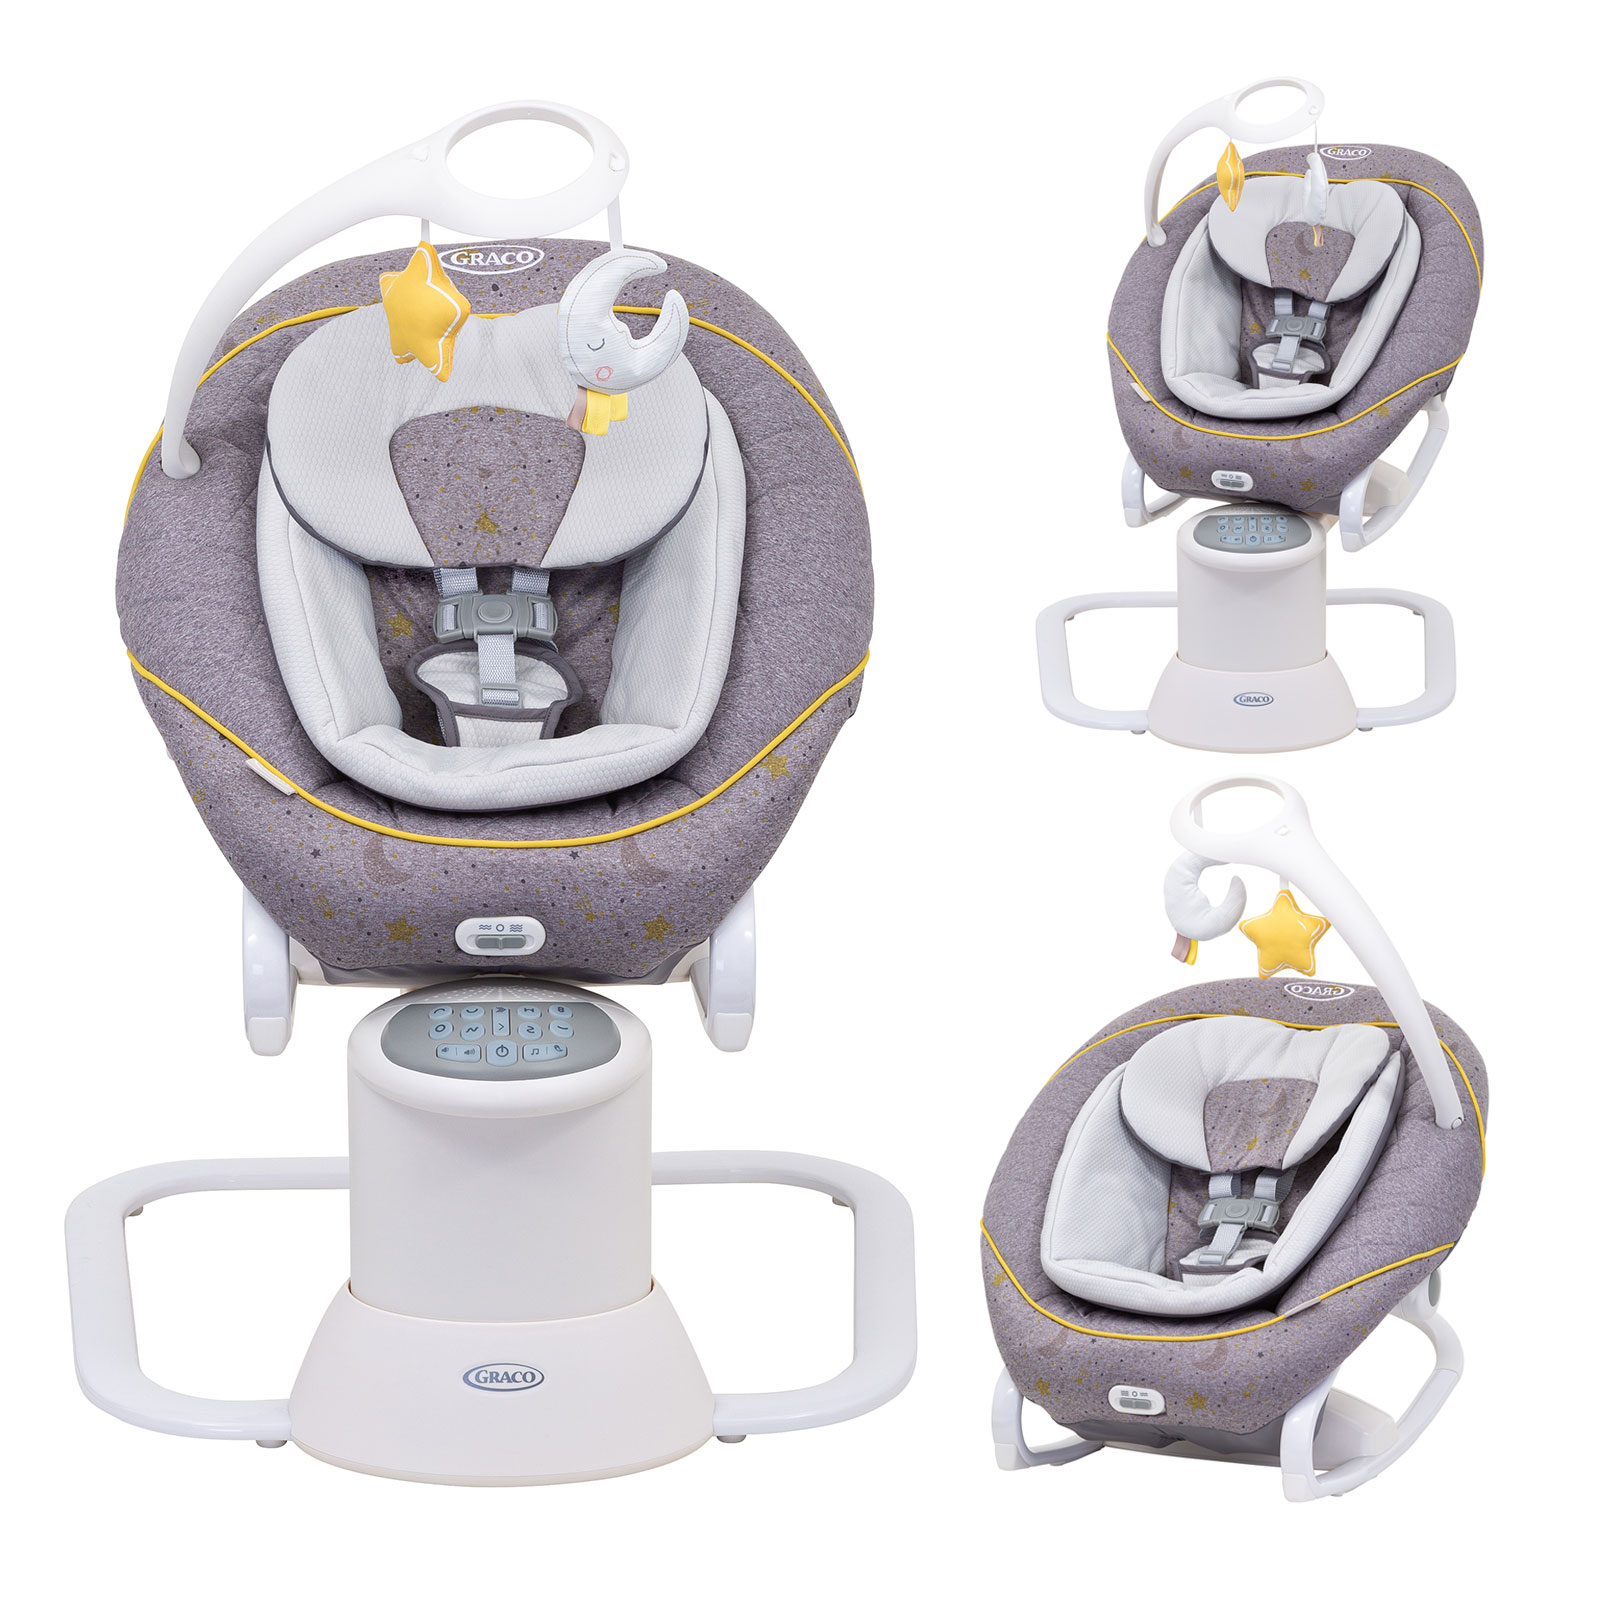 Graco All Ways Stargazer Soother – Buy Grey Vibration at Sounds Rocker Musical 2in1 with Swing | / & Online4baby